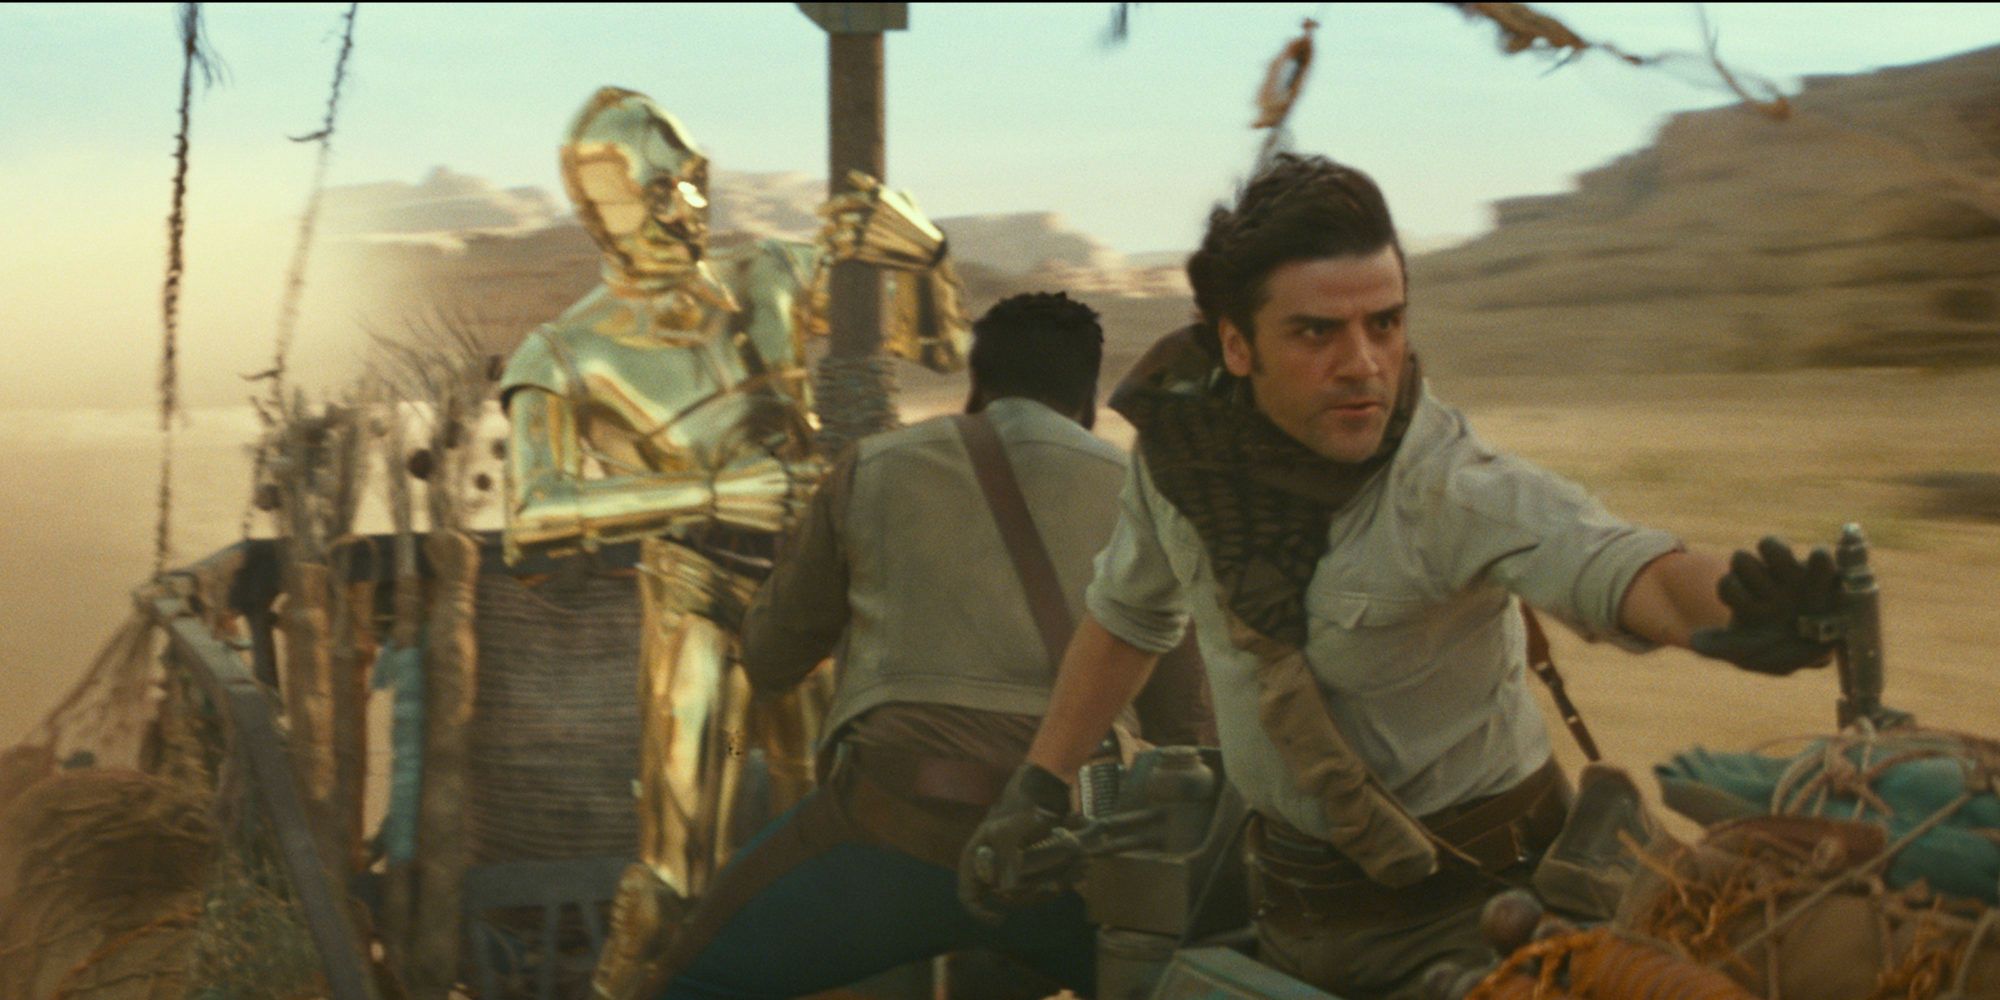 Poe, Finn, and C-3PO navigate through Pasaana, trying to escape the First Order forces in The Rise of Skywalker